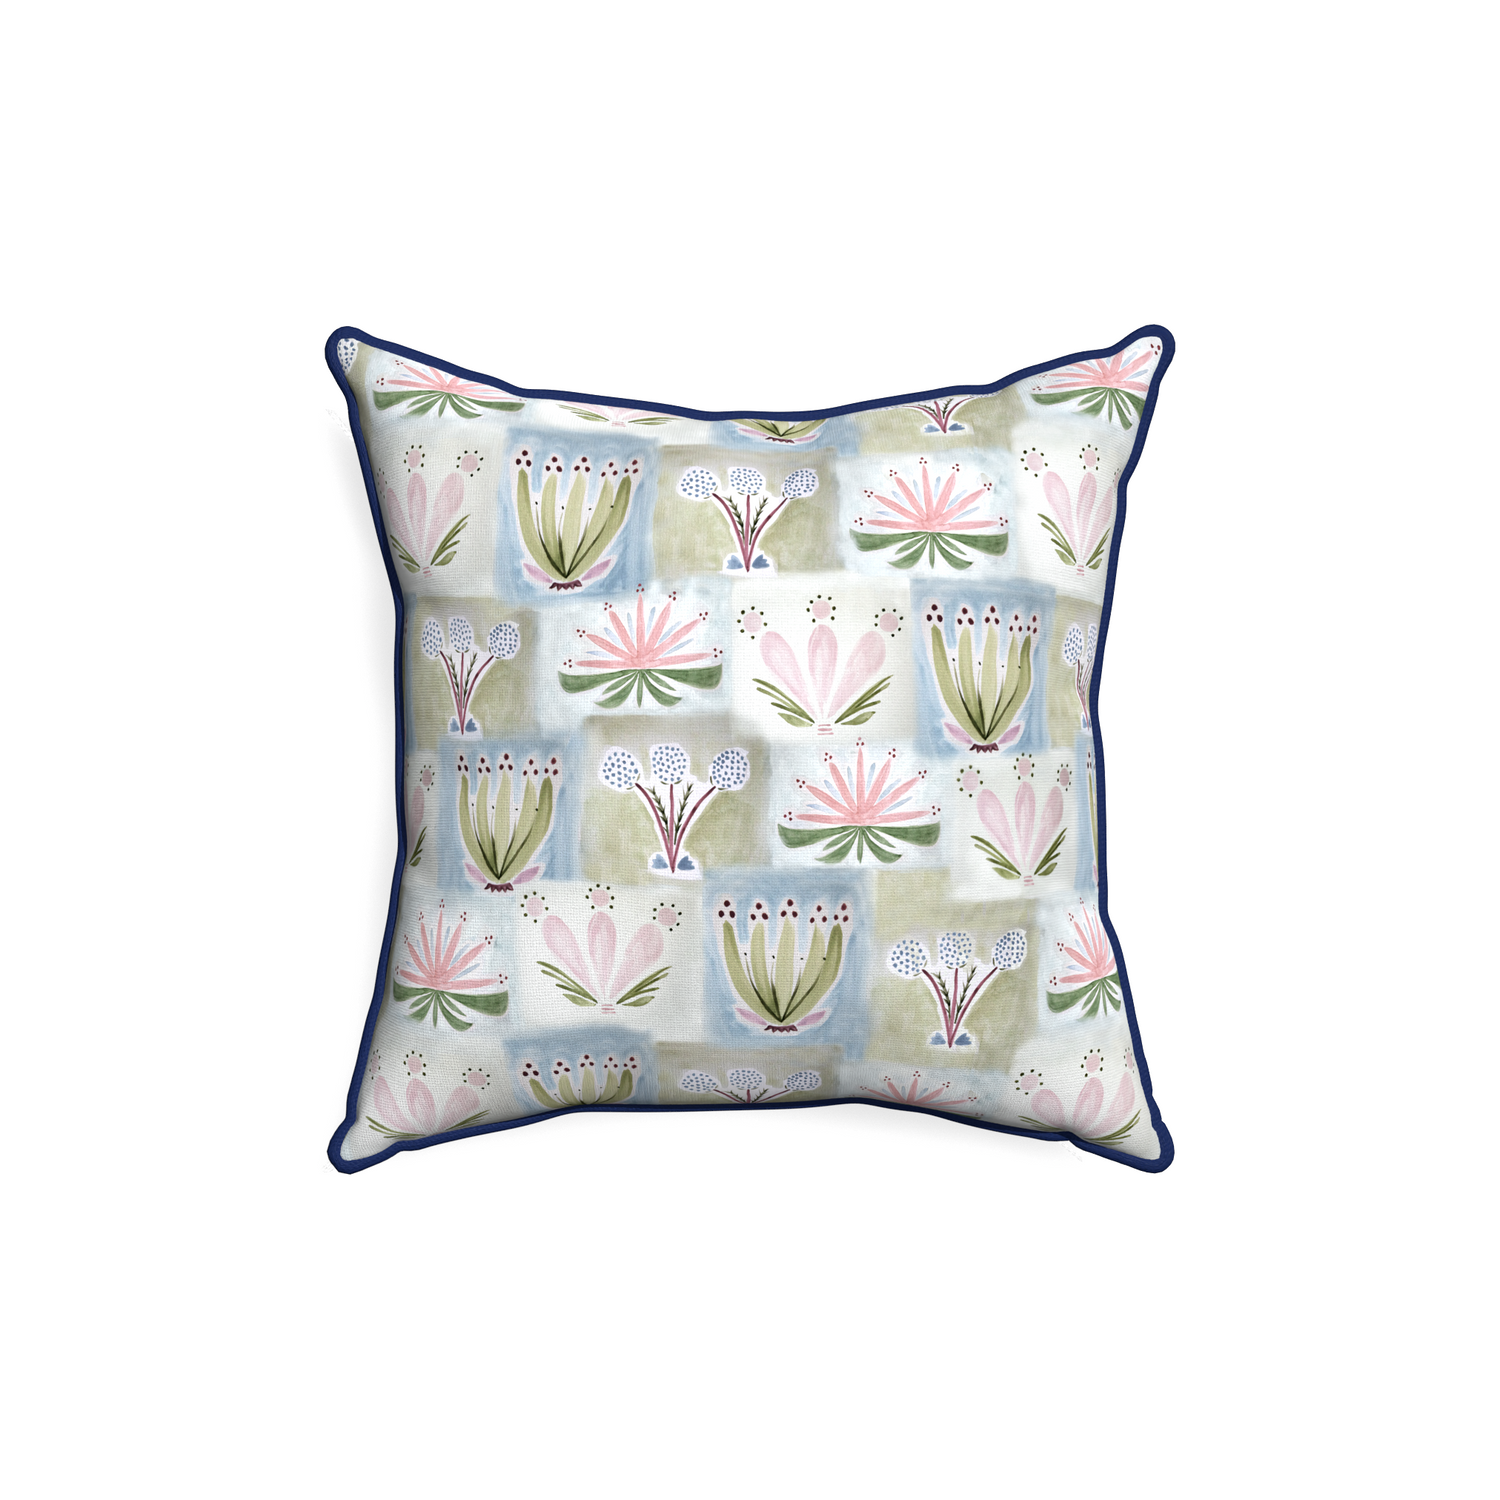 18-square harper custom hand-painted floralpillow with midnight piping on white background